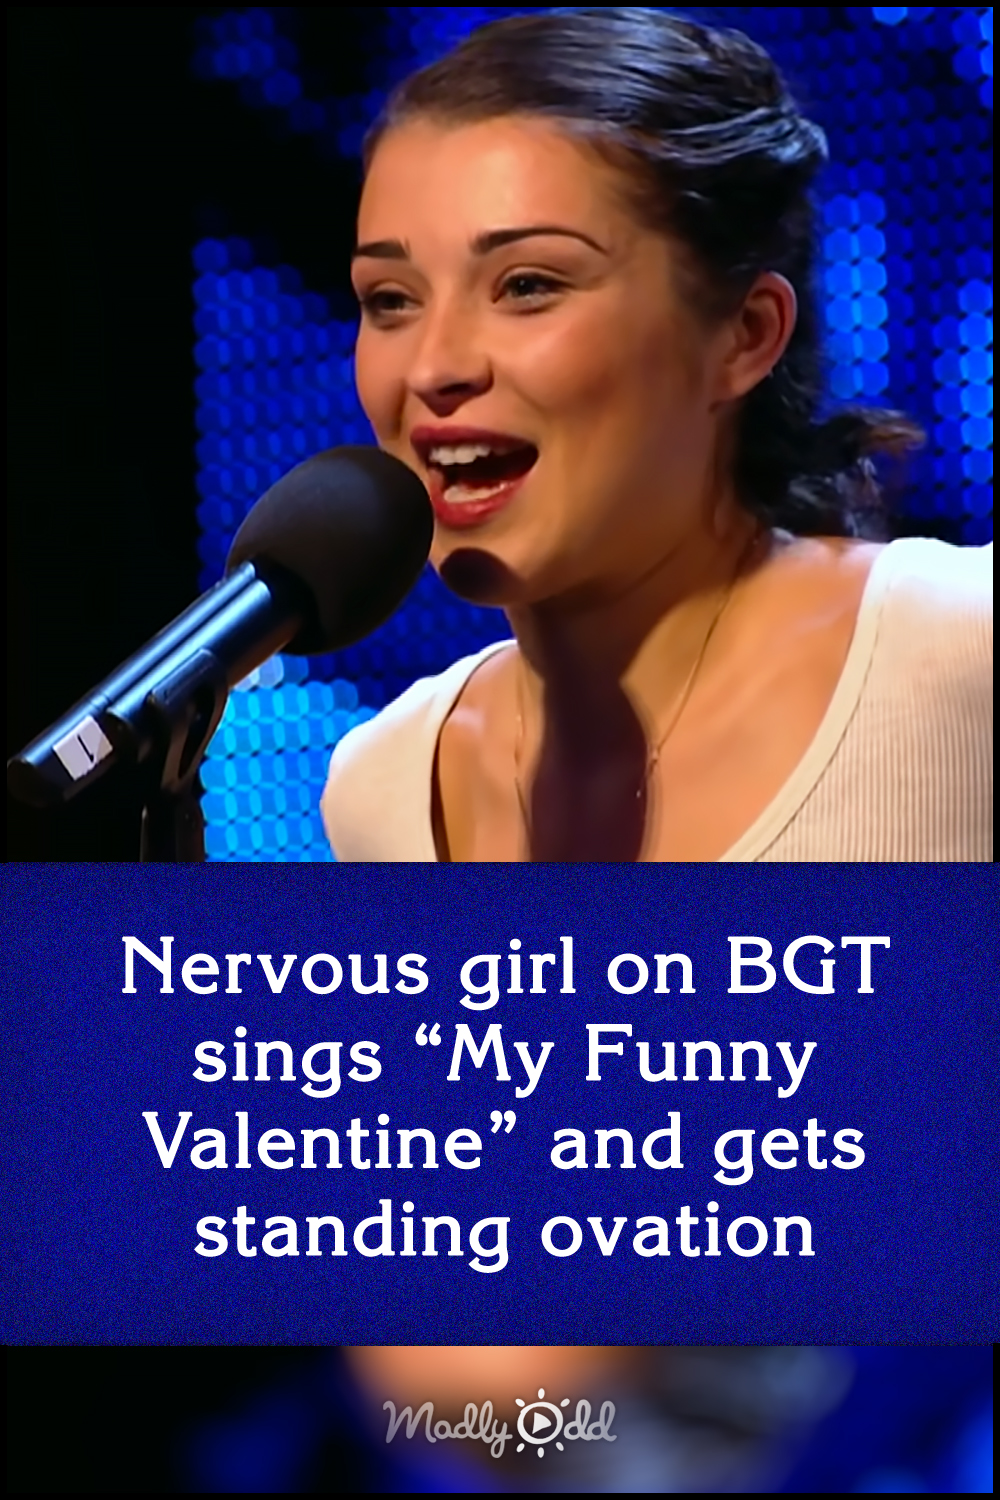 Nervous girl on BGT sings “My Funny Valentine” and gets standing ovation